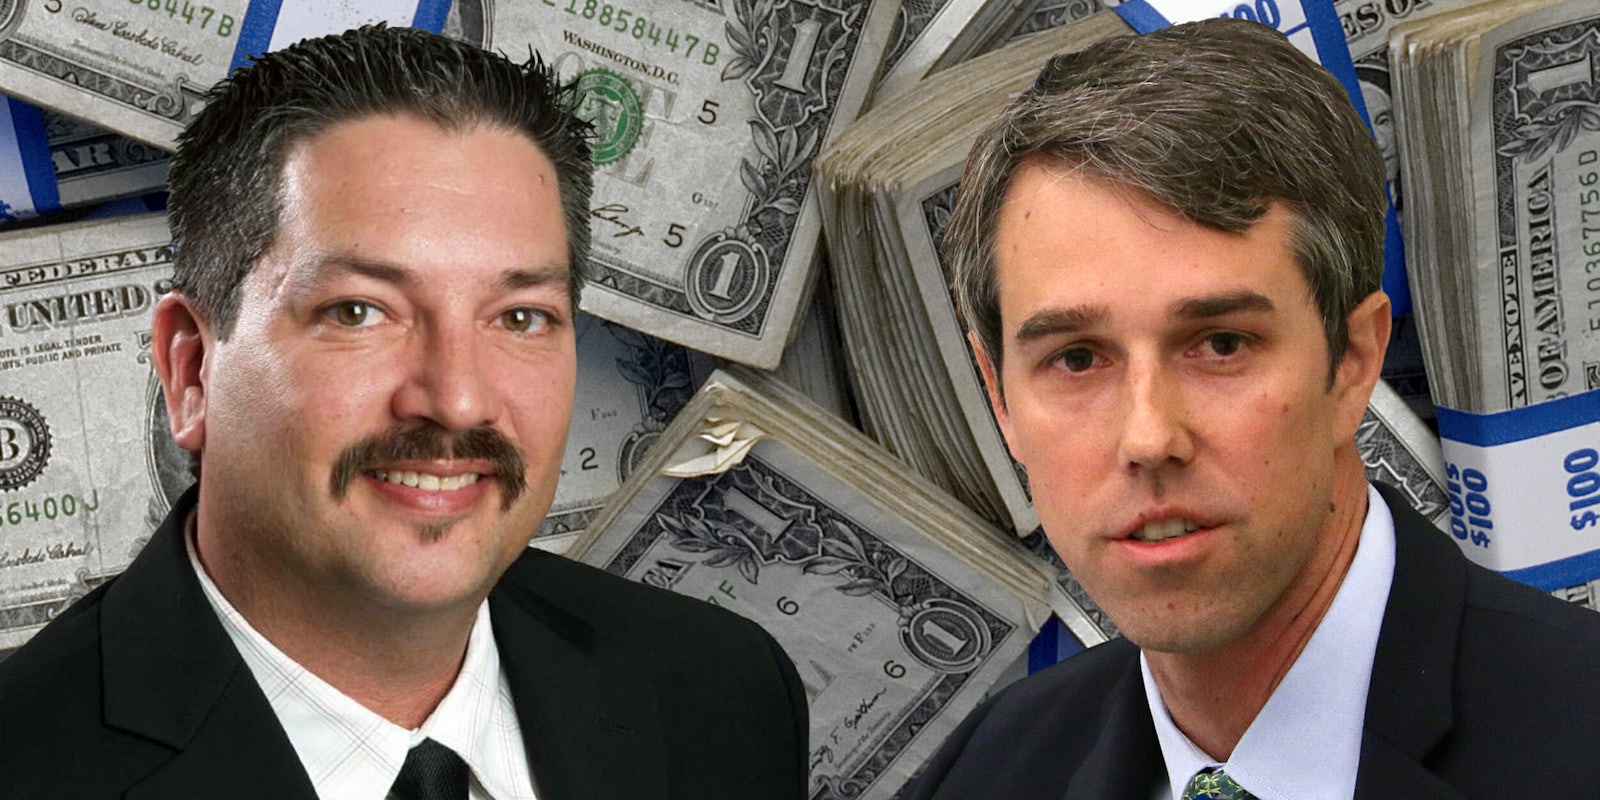 Randy Bryce and Beto O'Rourke in front of stacks of US currency